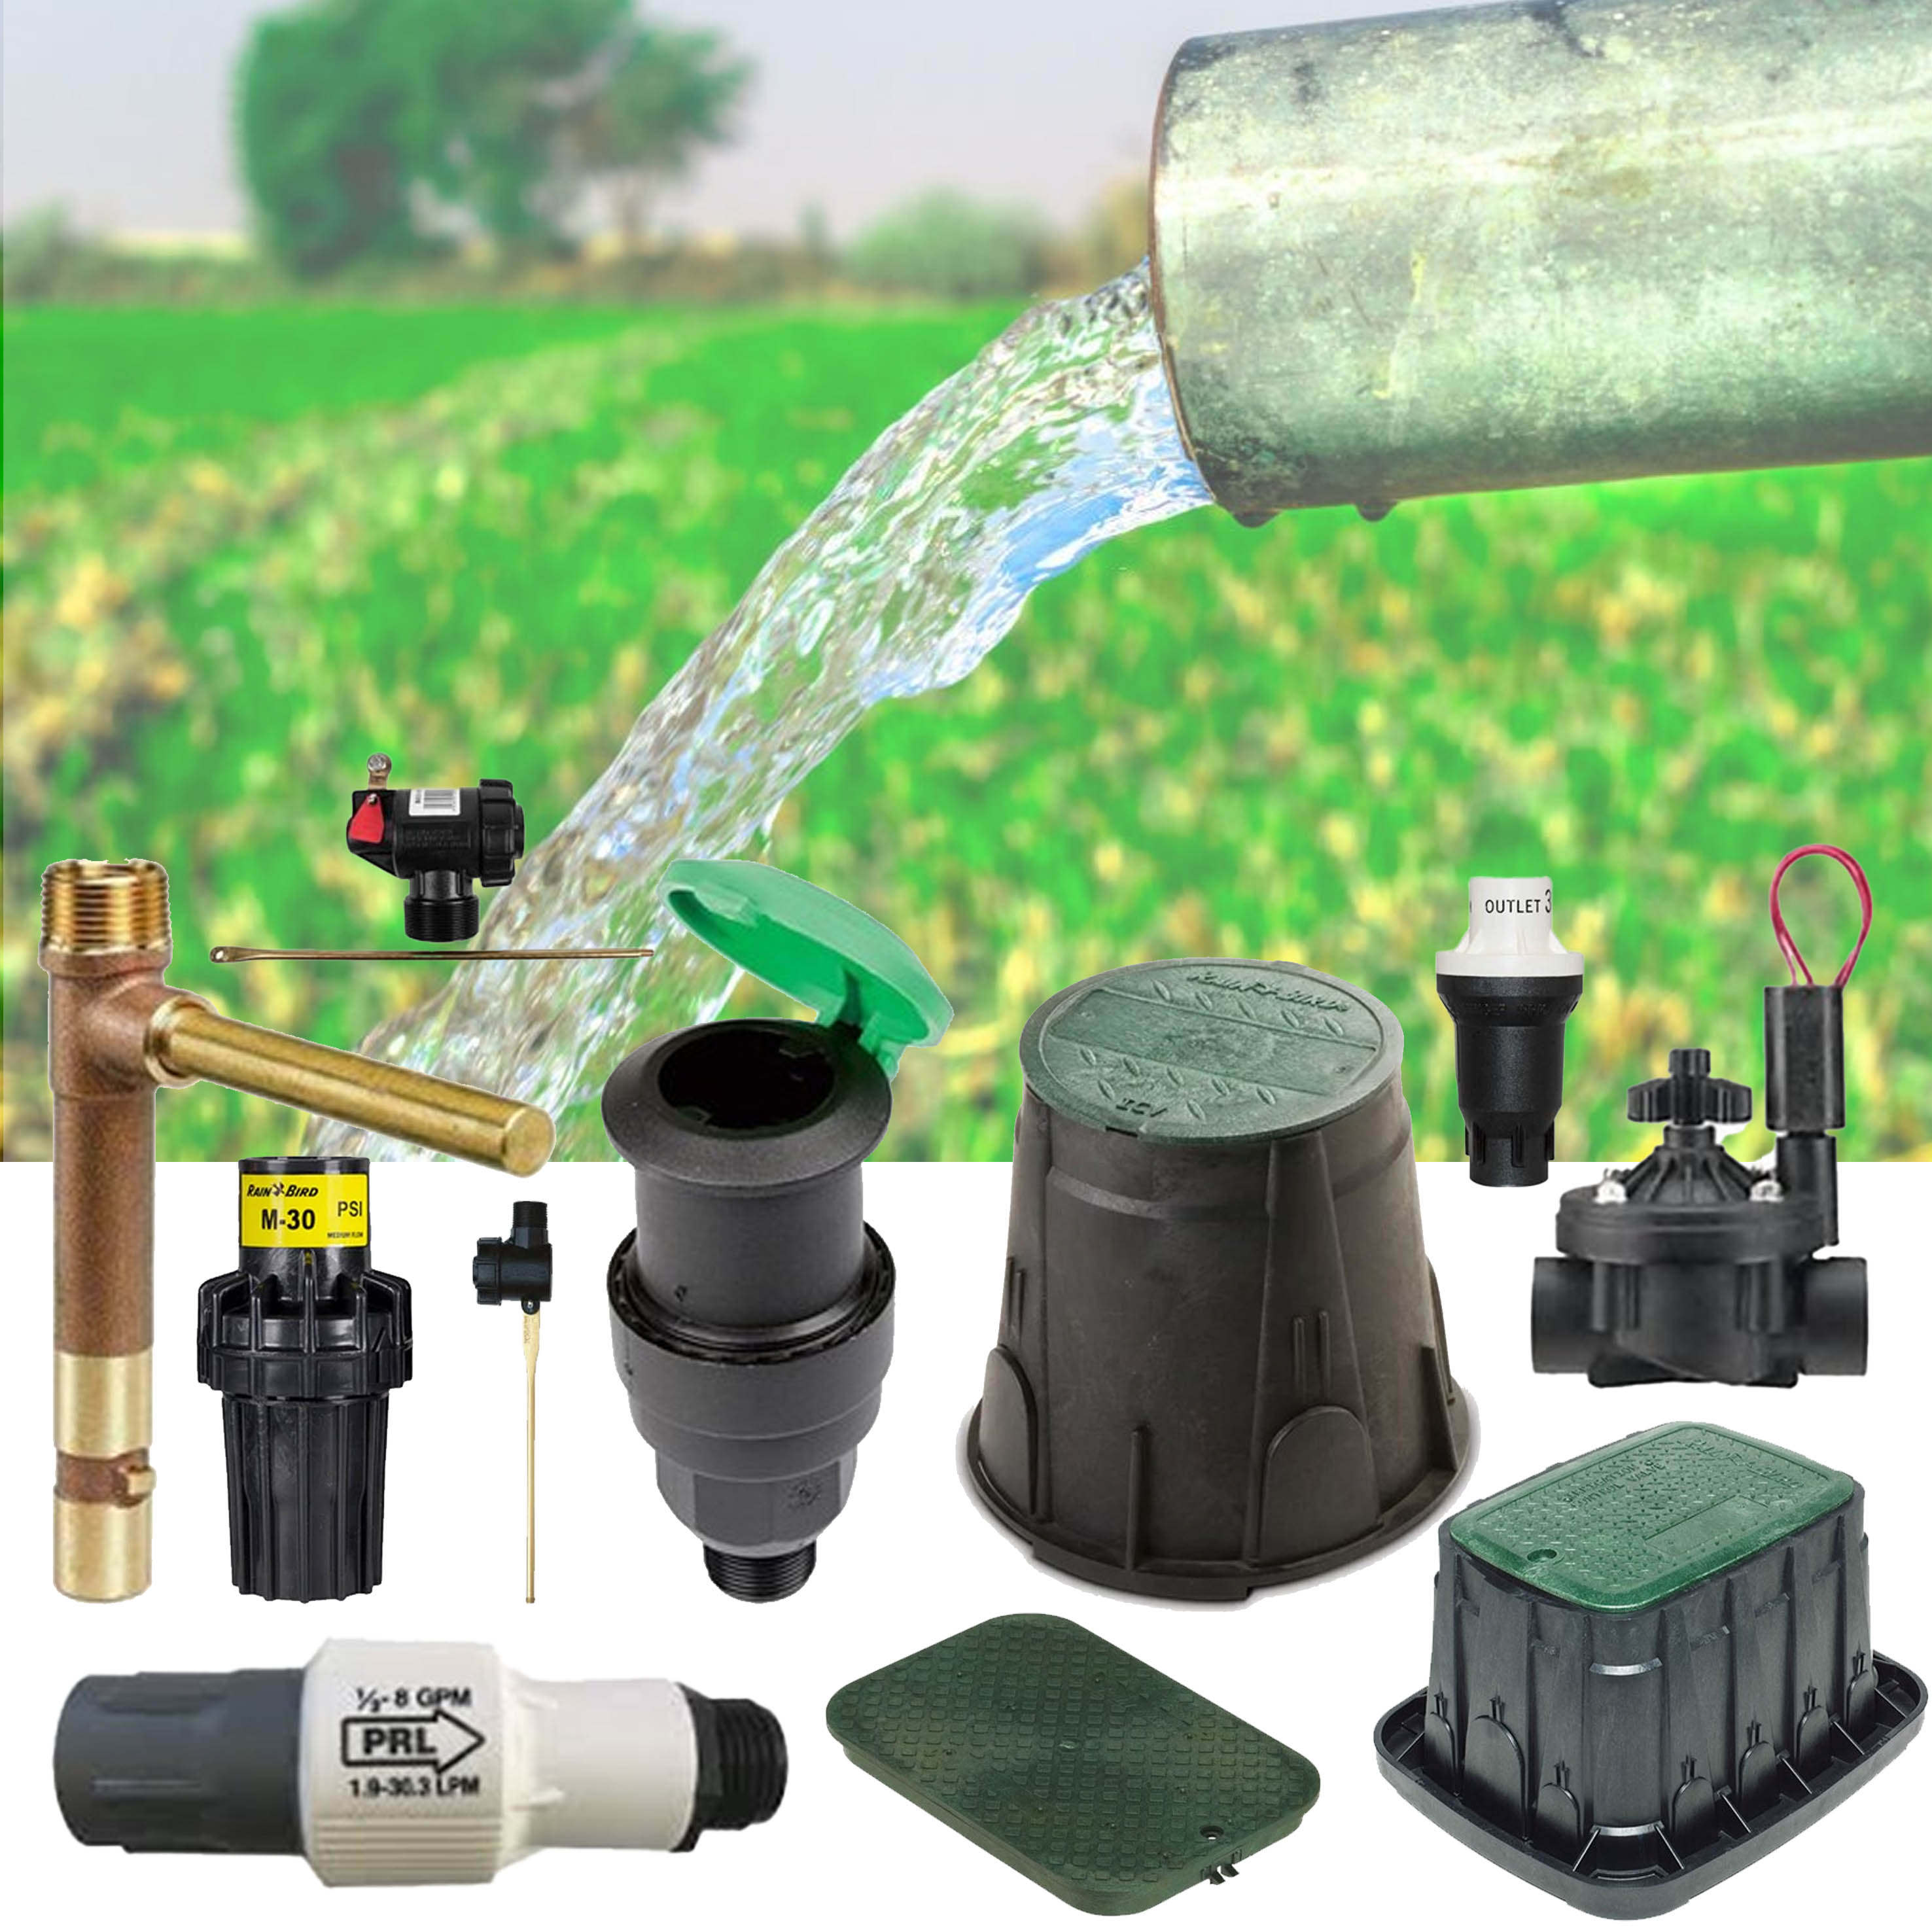 Filters, Floats & Valves